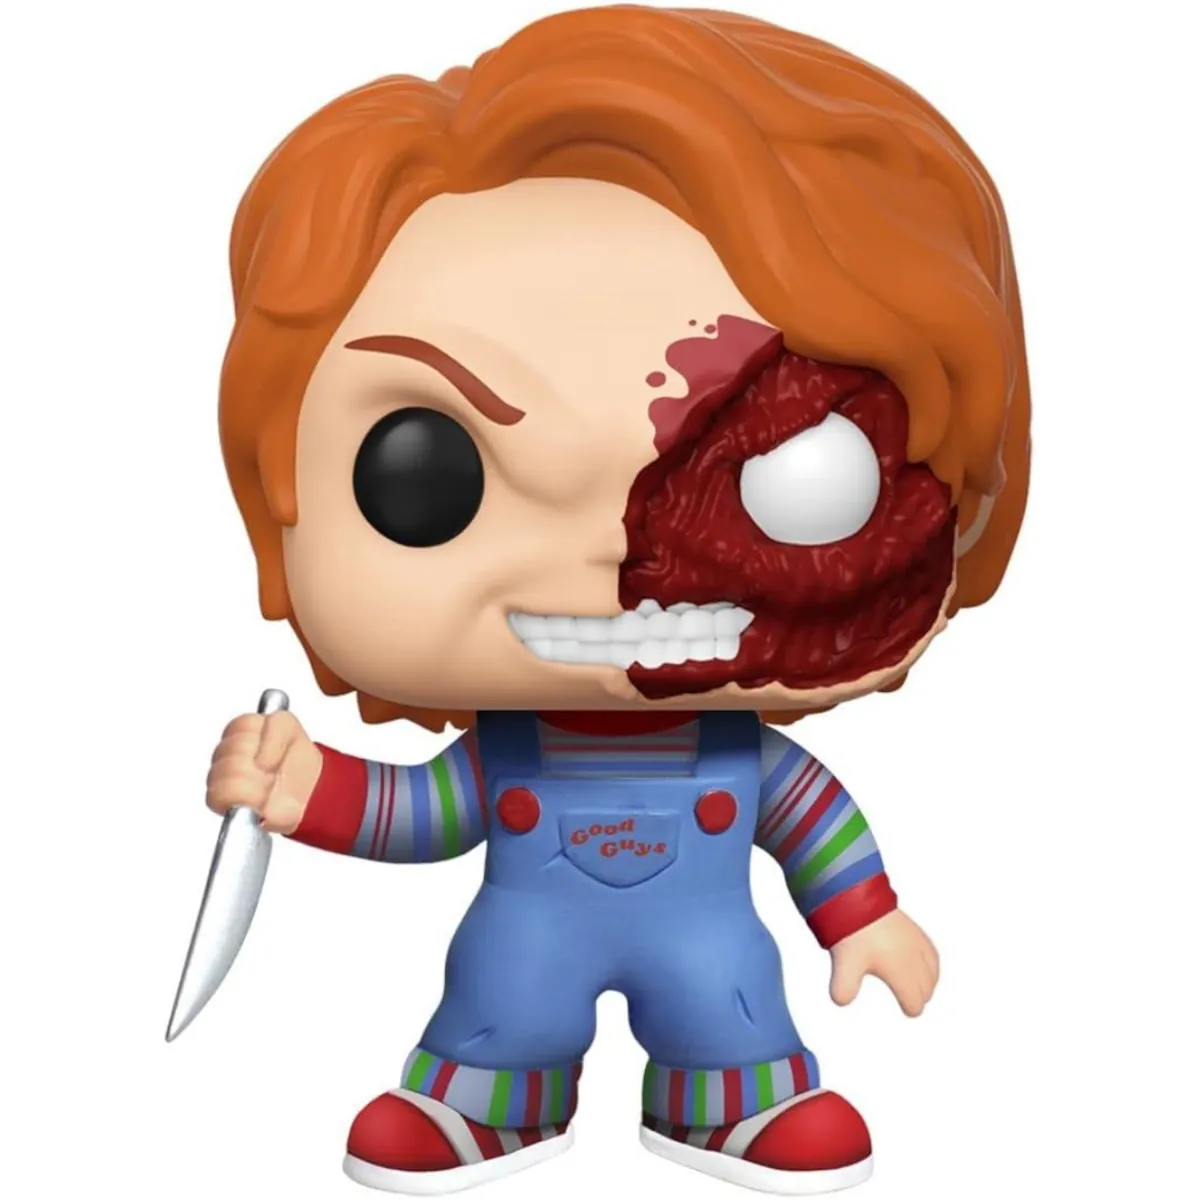 FK43032 Funko Pop! Movies - Child's Play 3 - Chucky 'Half Face' (Exclusive) Collectable Vinyl Figure